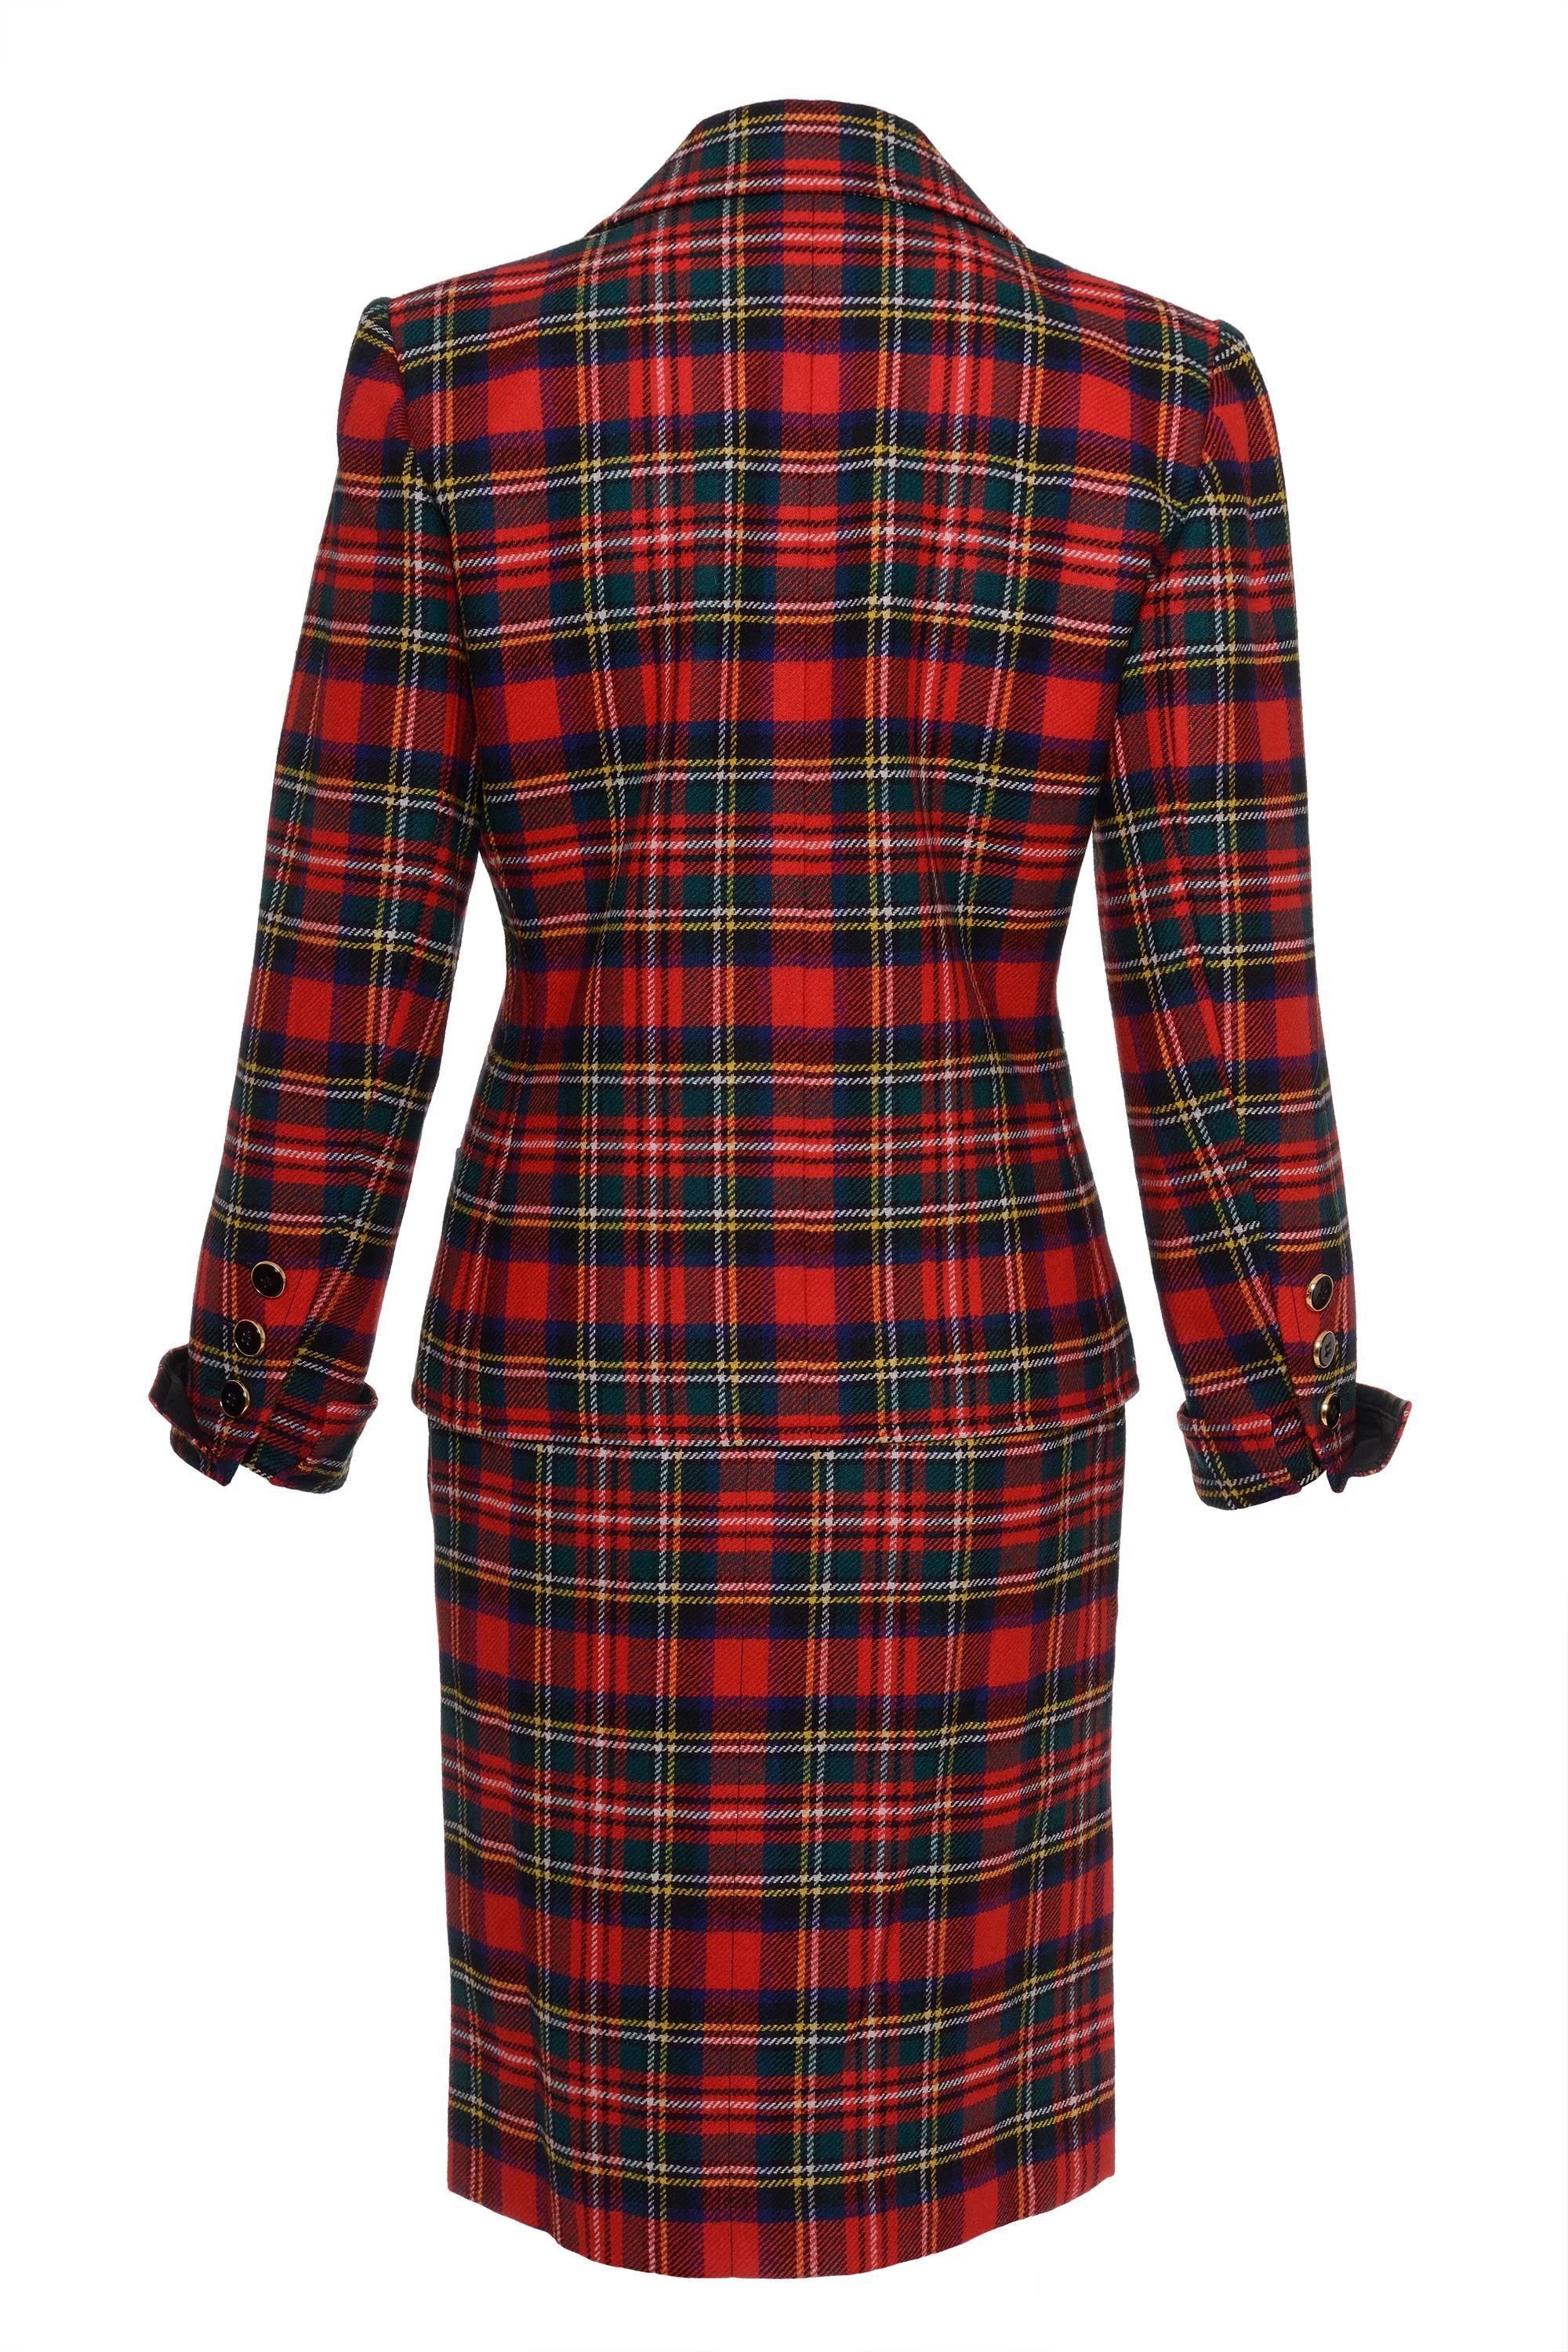 This lovely 1980s Rive Gauche tartan suit skirt by YVES SAINT LAURENT has a jacket with two front round pockets with buttons, two front welt pockets, tailor seam, two-piece sleeves, buttoned cuffs, button and buttonhole closure. The skirt has a side